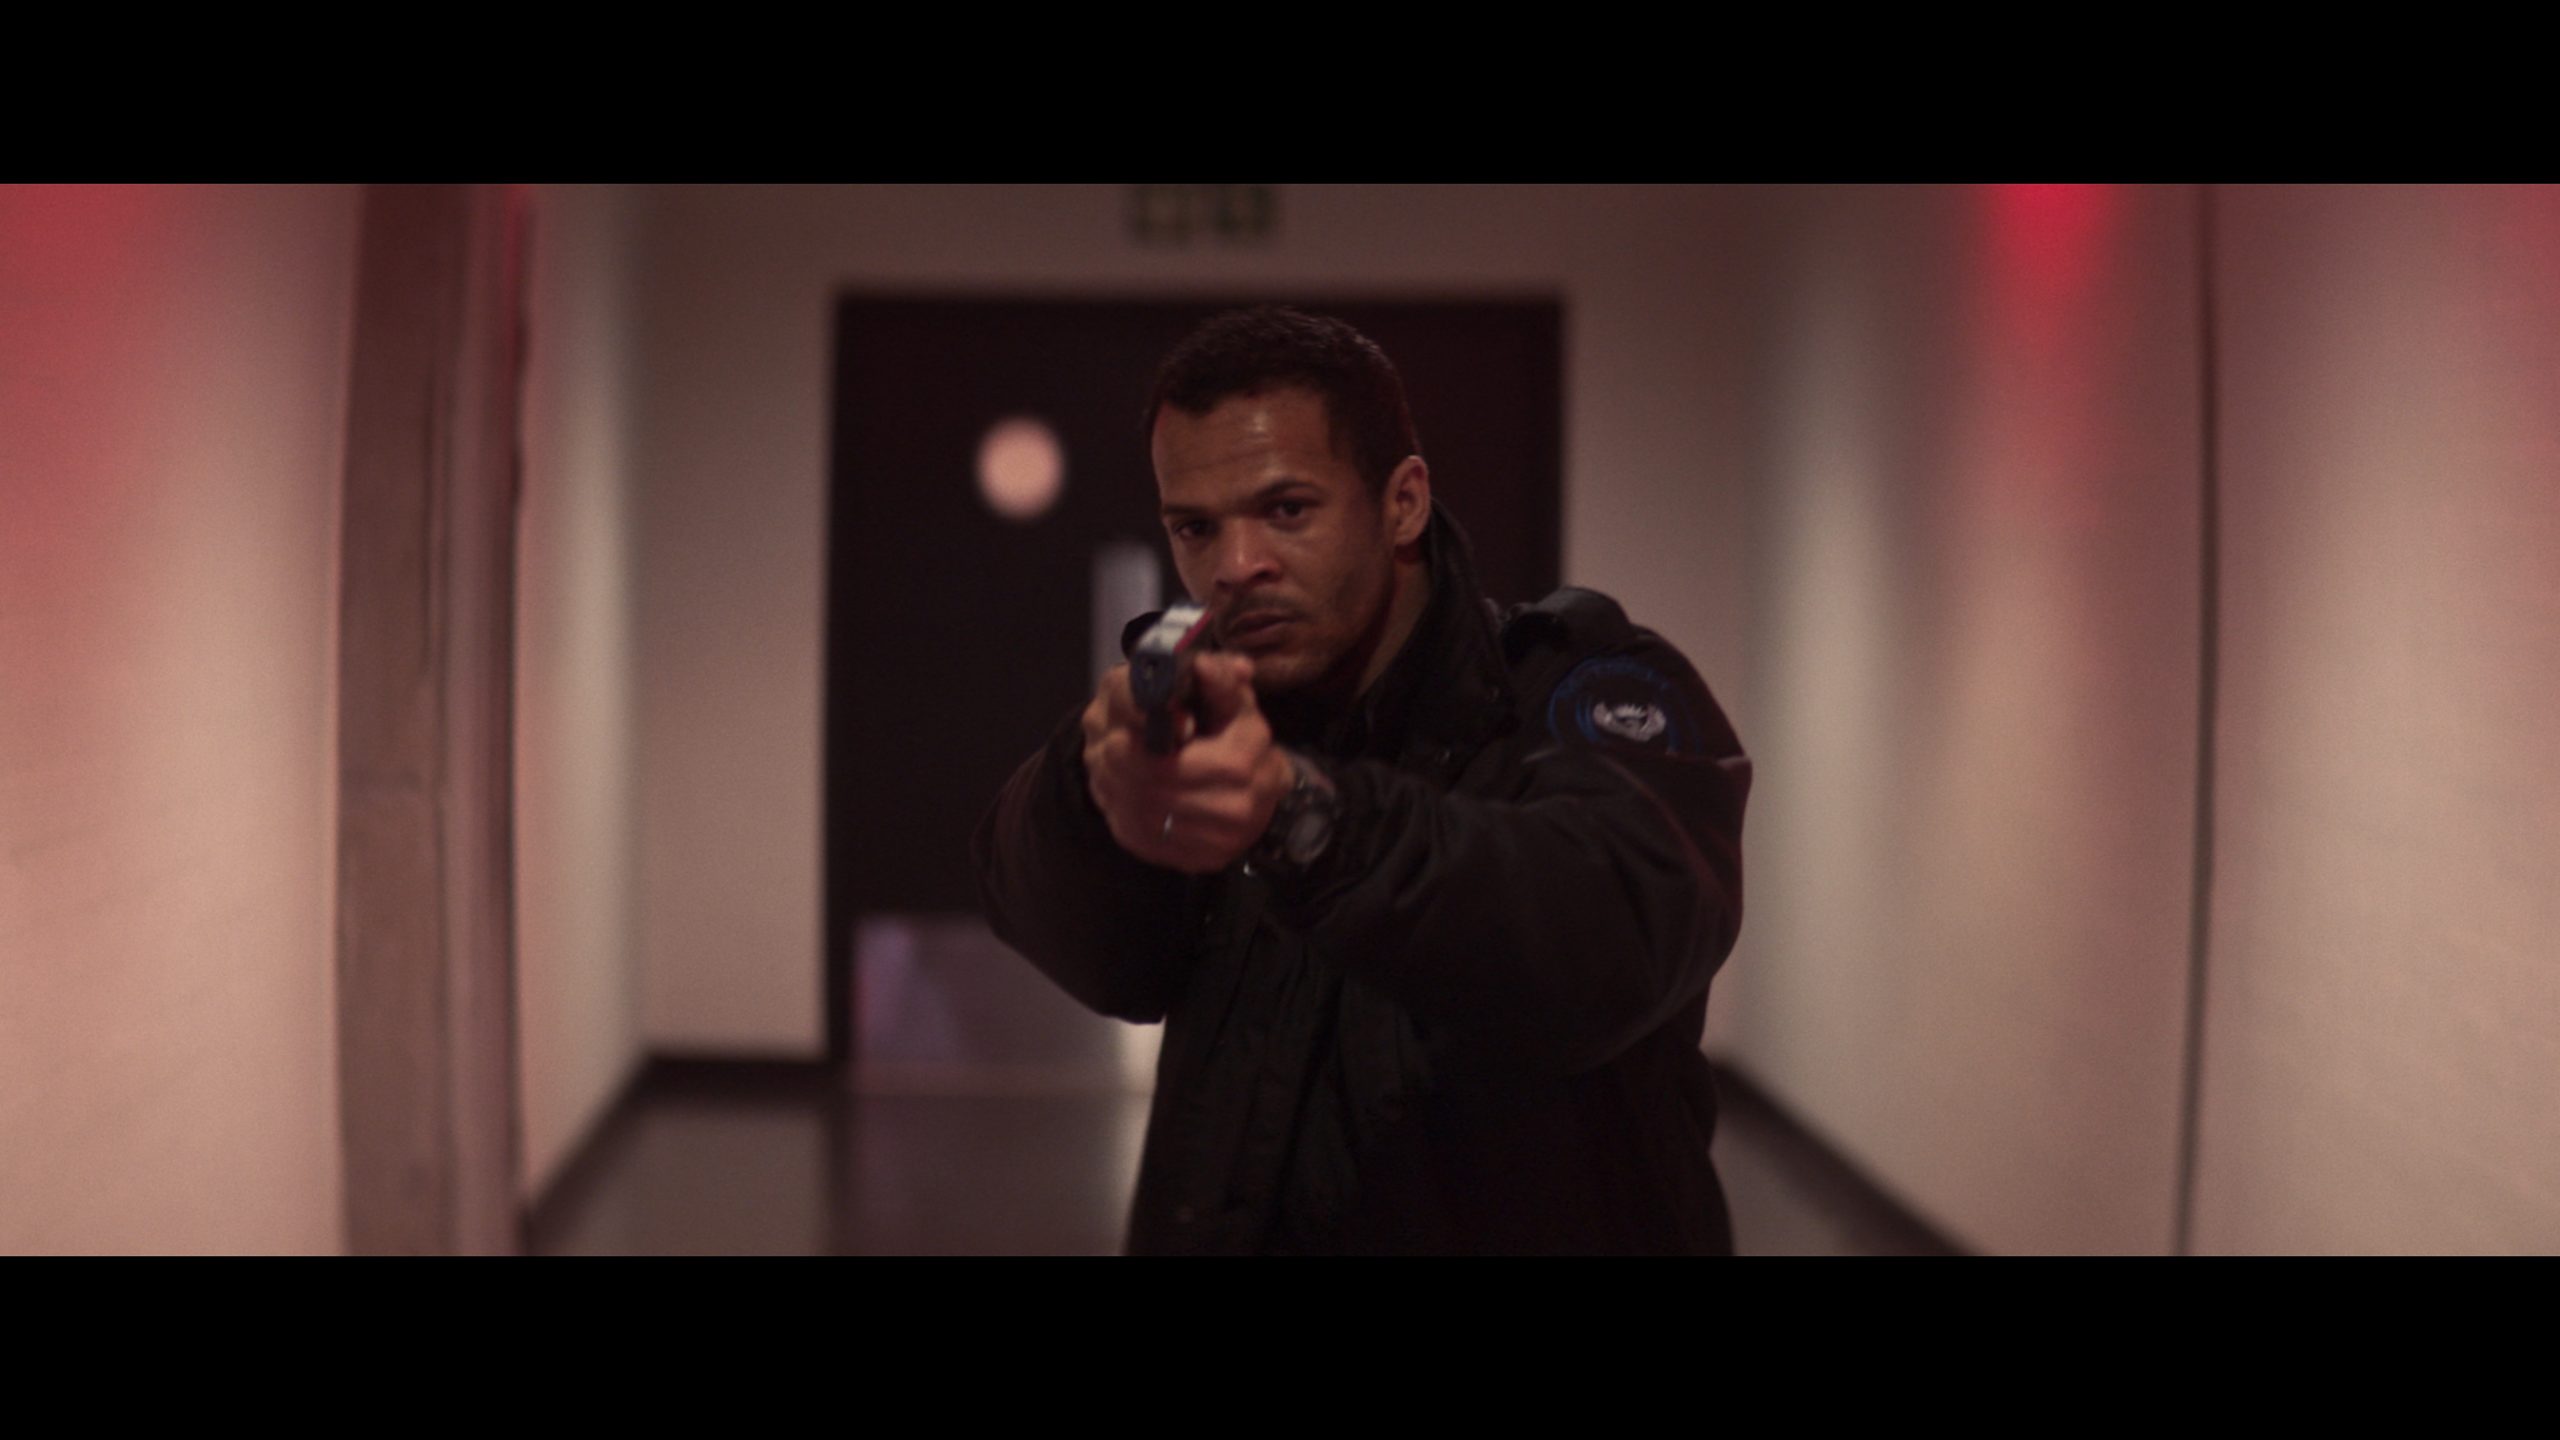 Indemnity Trailer Launches South African Action Thriller Set to Premiere at Fantasia Film Fest